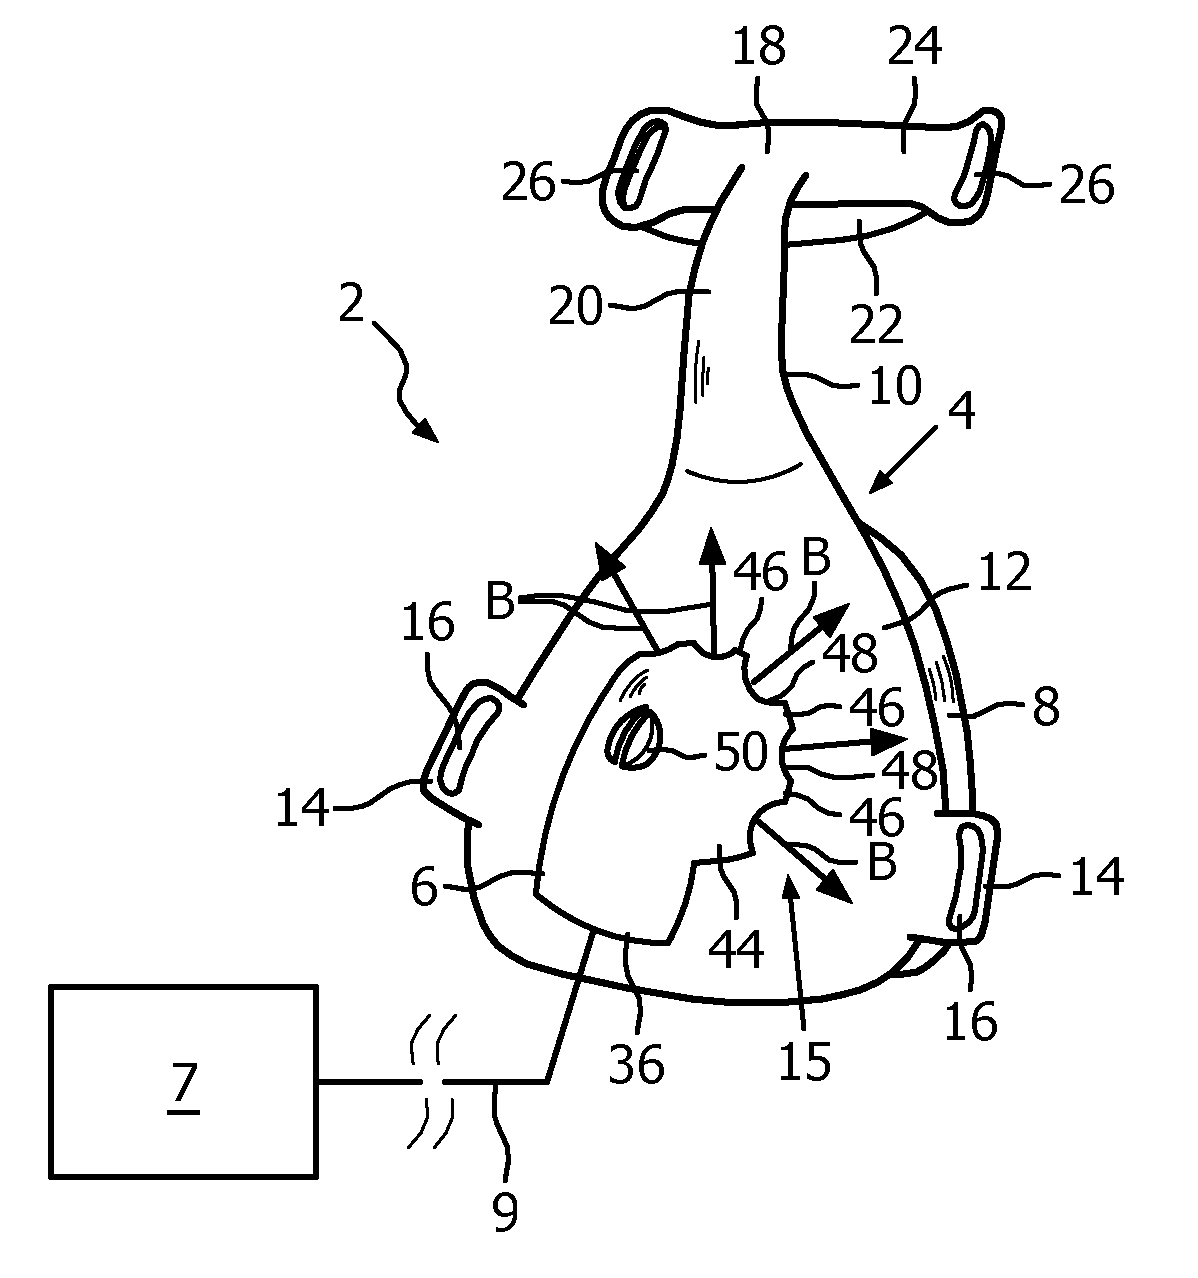 Exhaust gas assembly for a patient interface device